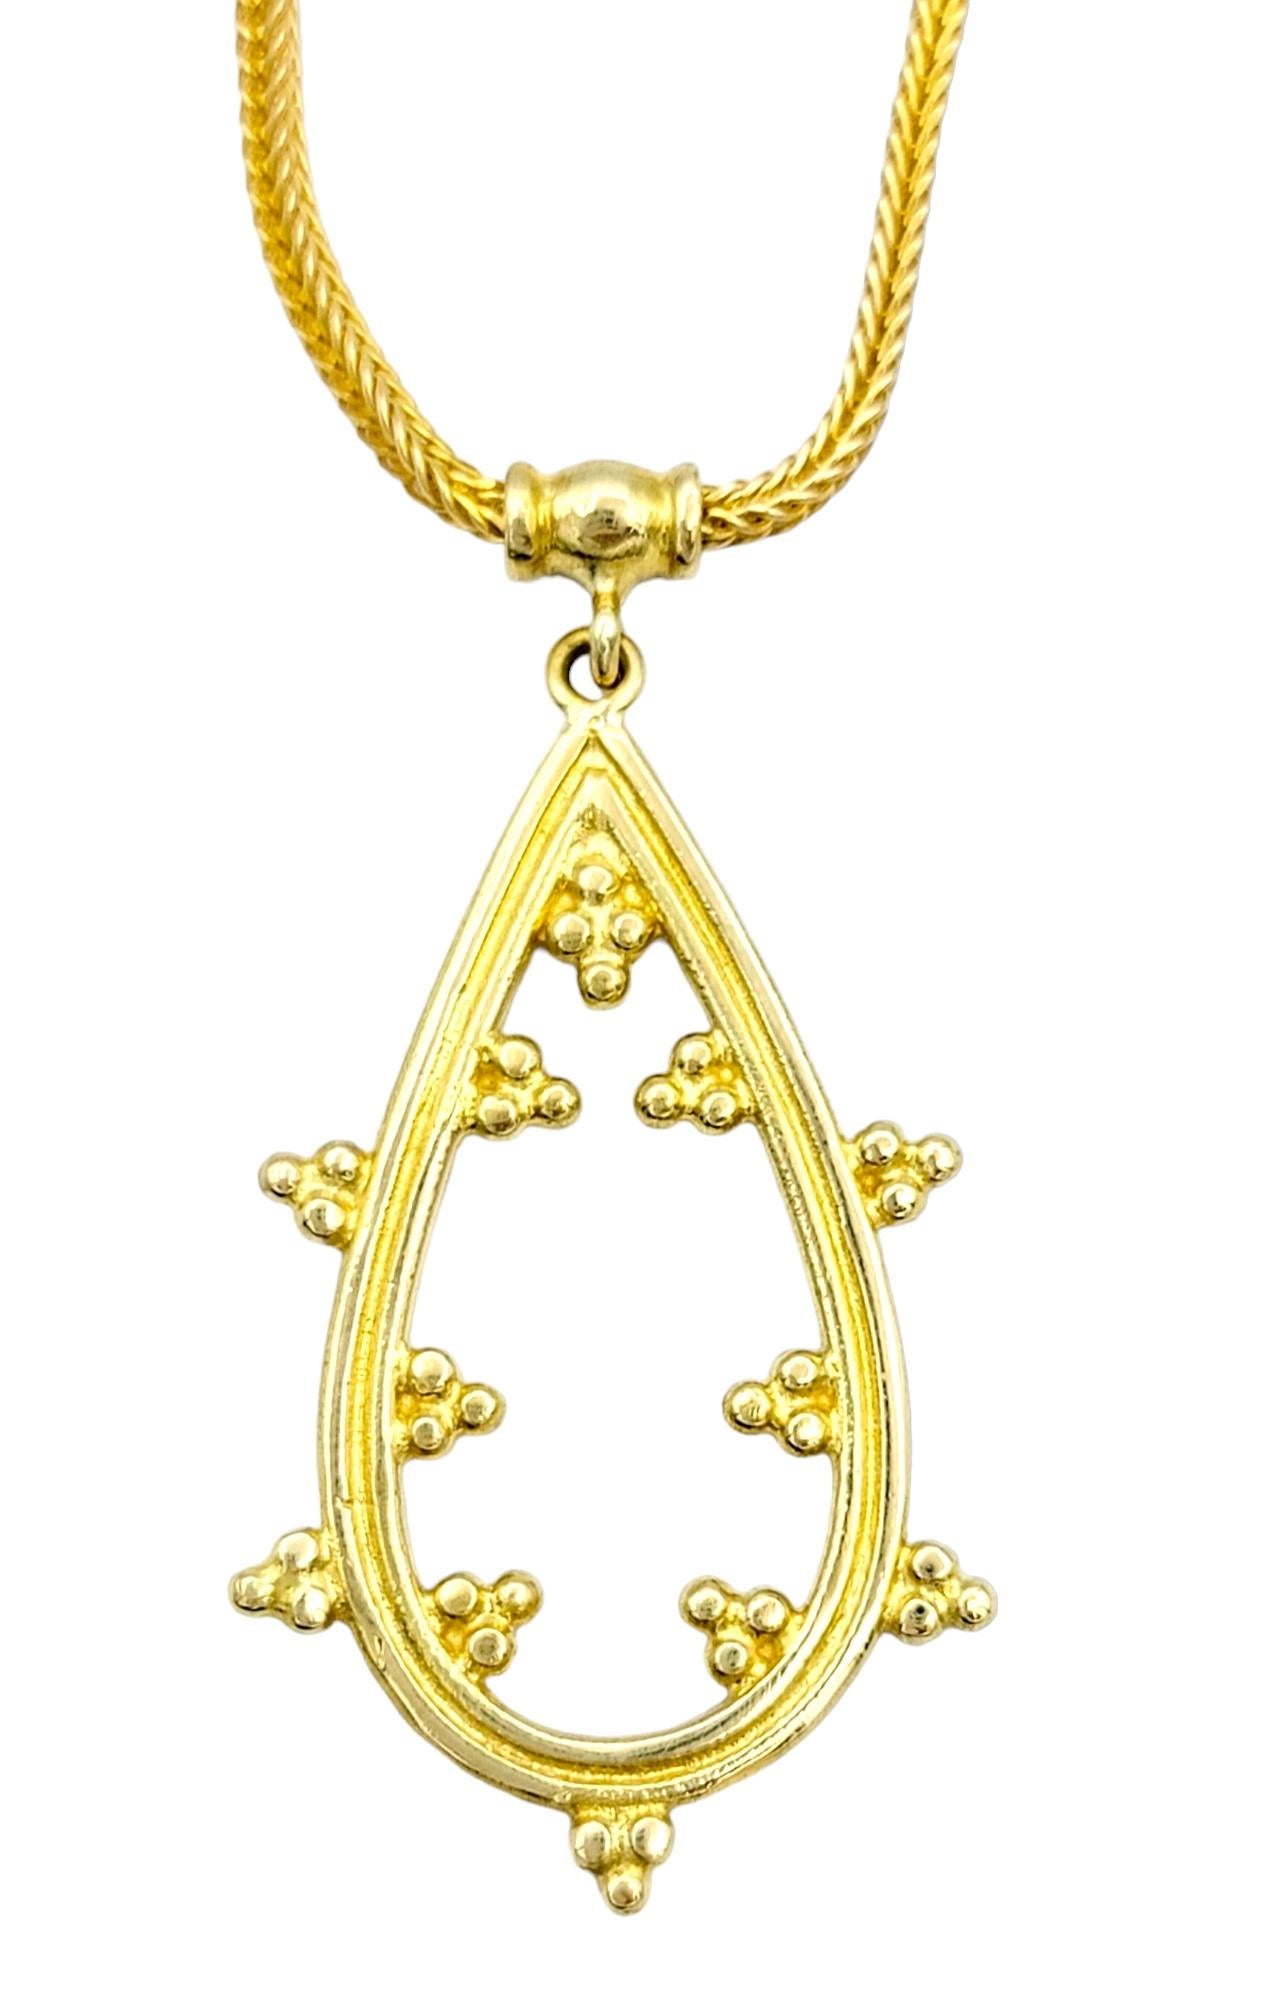 Contemporary Pear Shaped Open Pendant Necklace with Bead Clusters in 18 Karat Yellow Gold For Sale